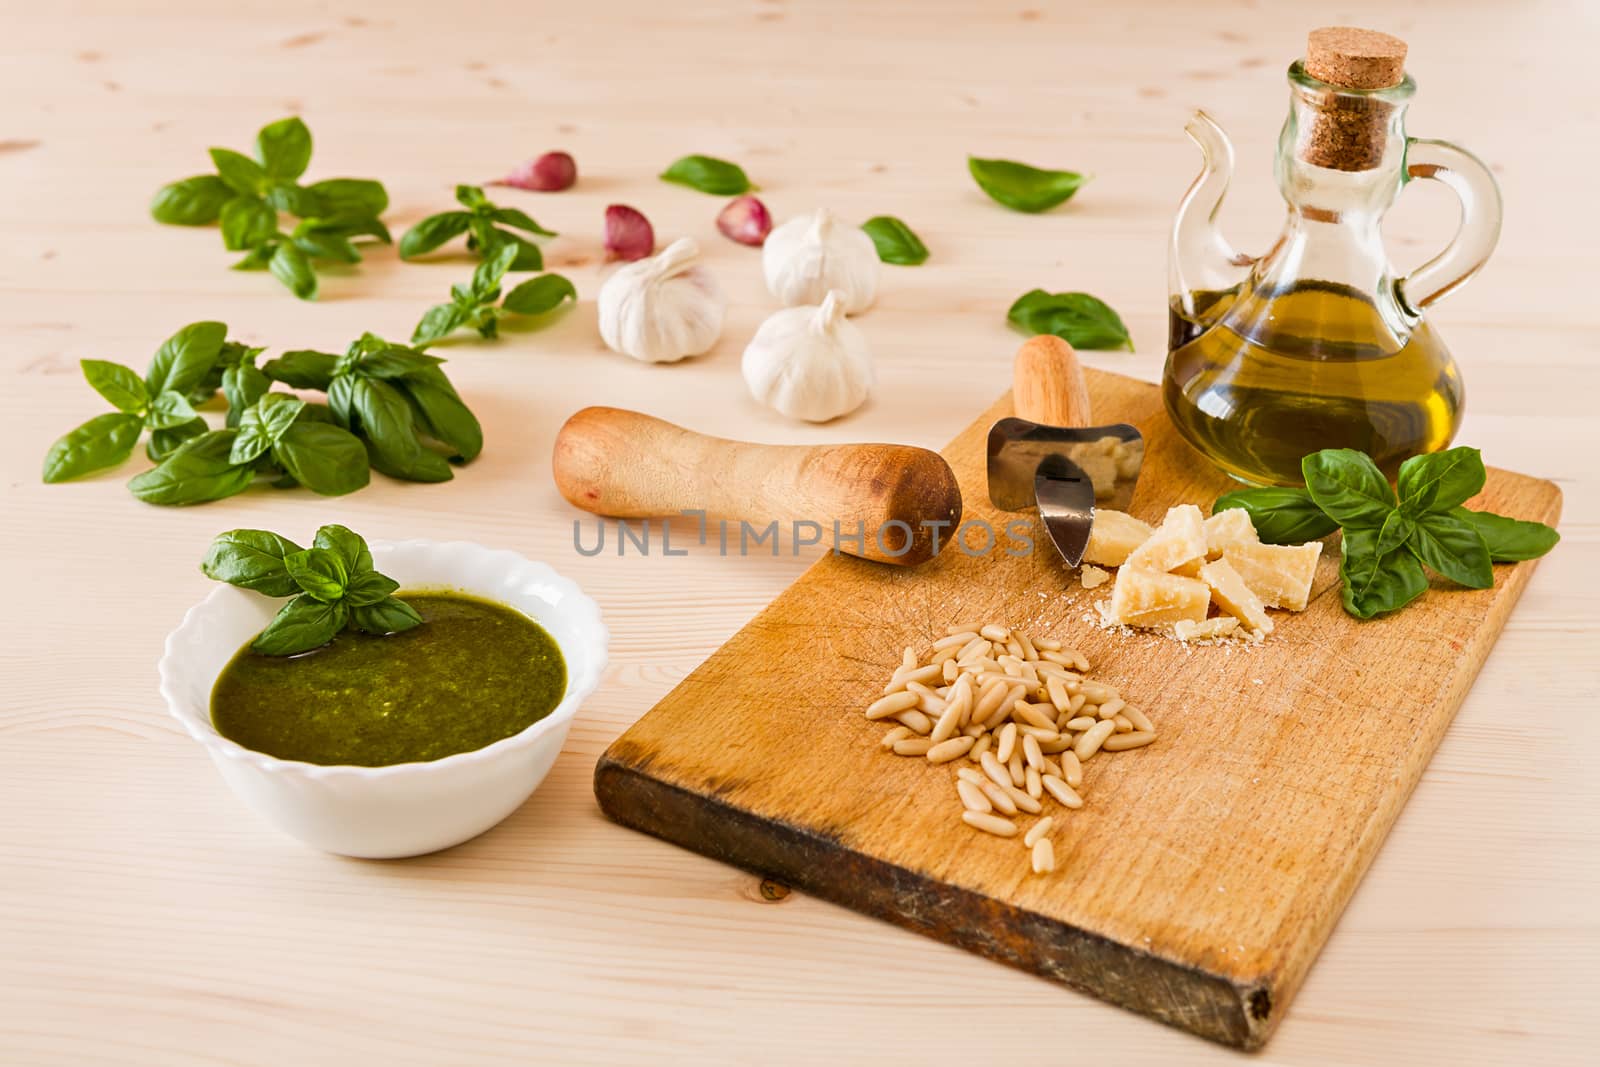 Fresh pesto genovese sauce over a wooden background